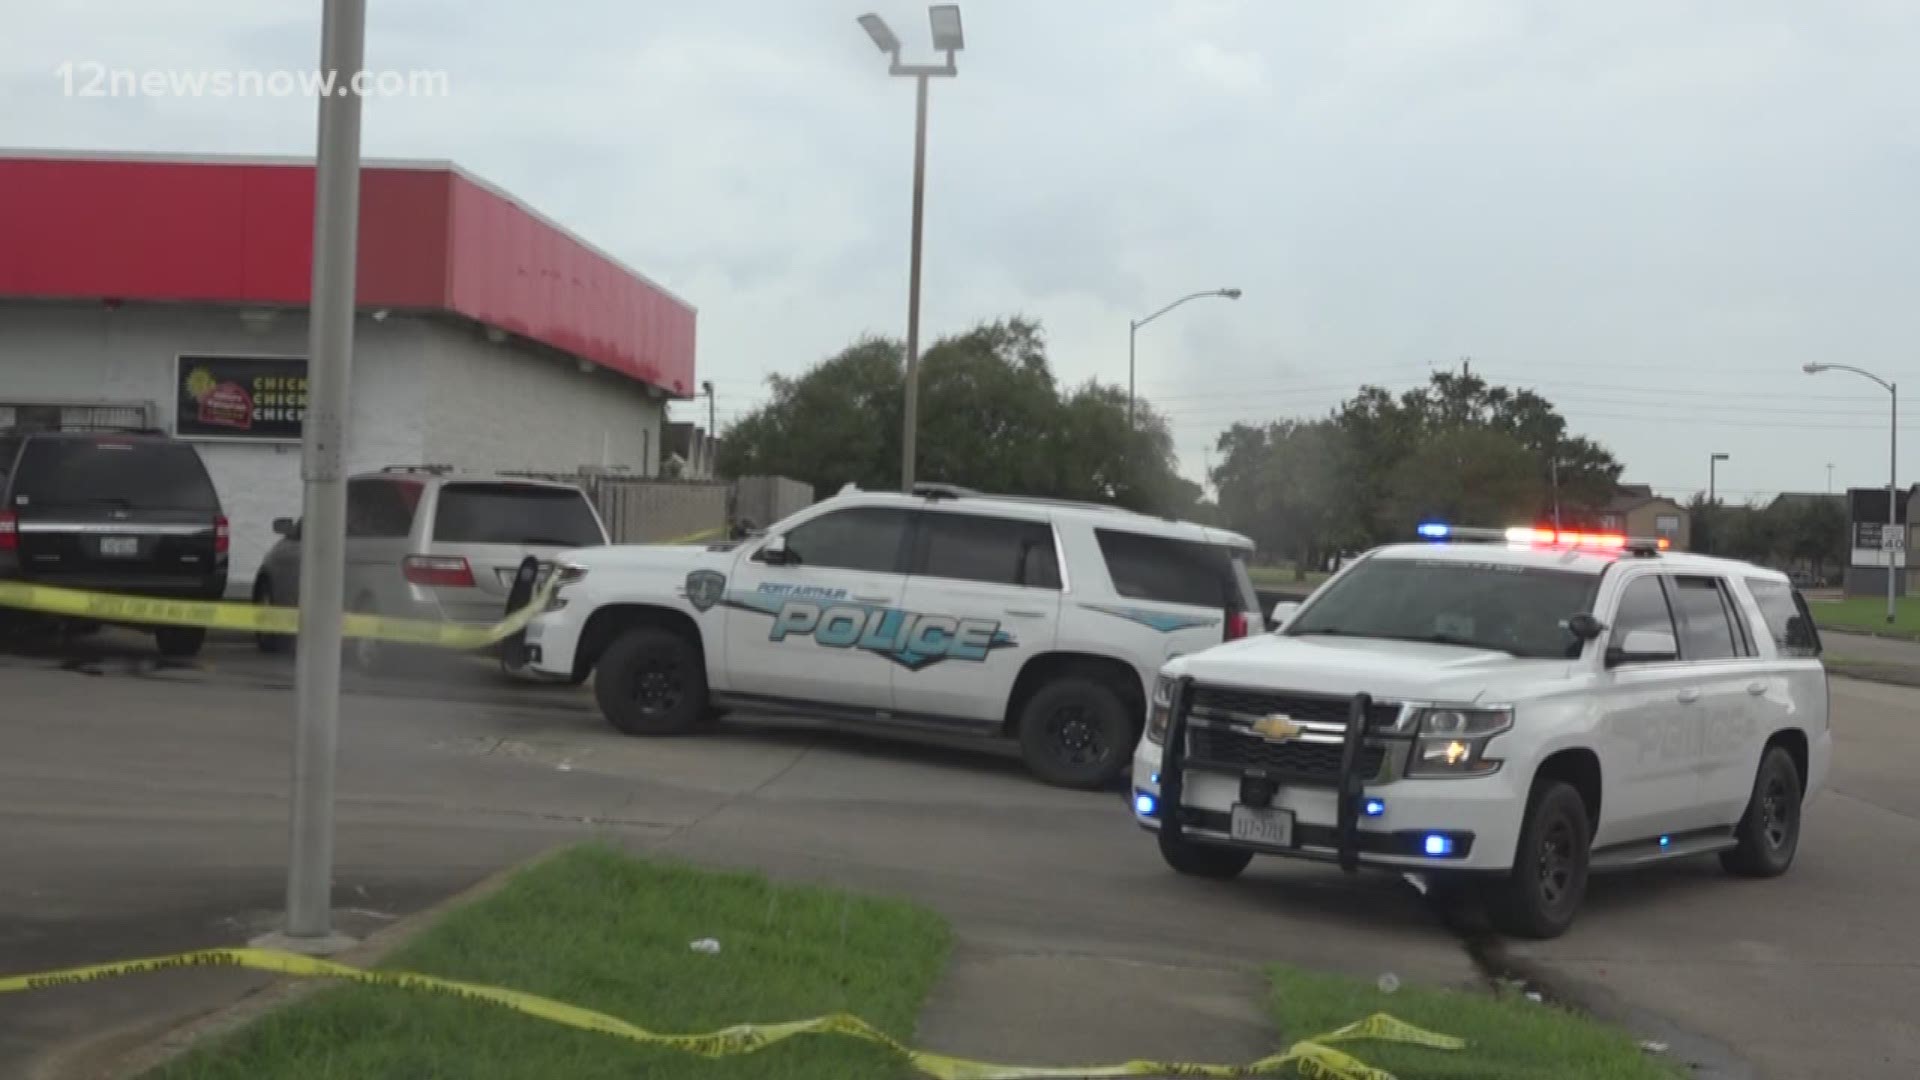 One man has been arrested as Port Arthur Police investigate a shooting at a gas station on Ninth Avenue. Officers were responded to the Citgo at 9th Avenue and Turtle Creek Drive just after 1:30 p.m. Monday after a caller said a person had been shot in the abdomen according to a news release from the Port Arthur Police Department.